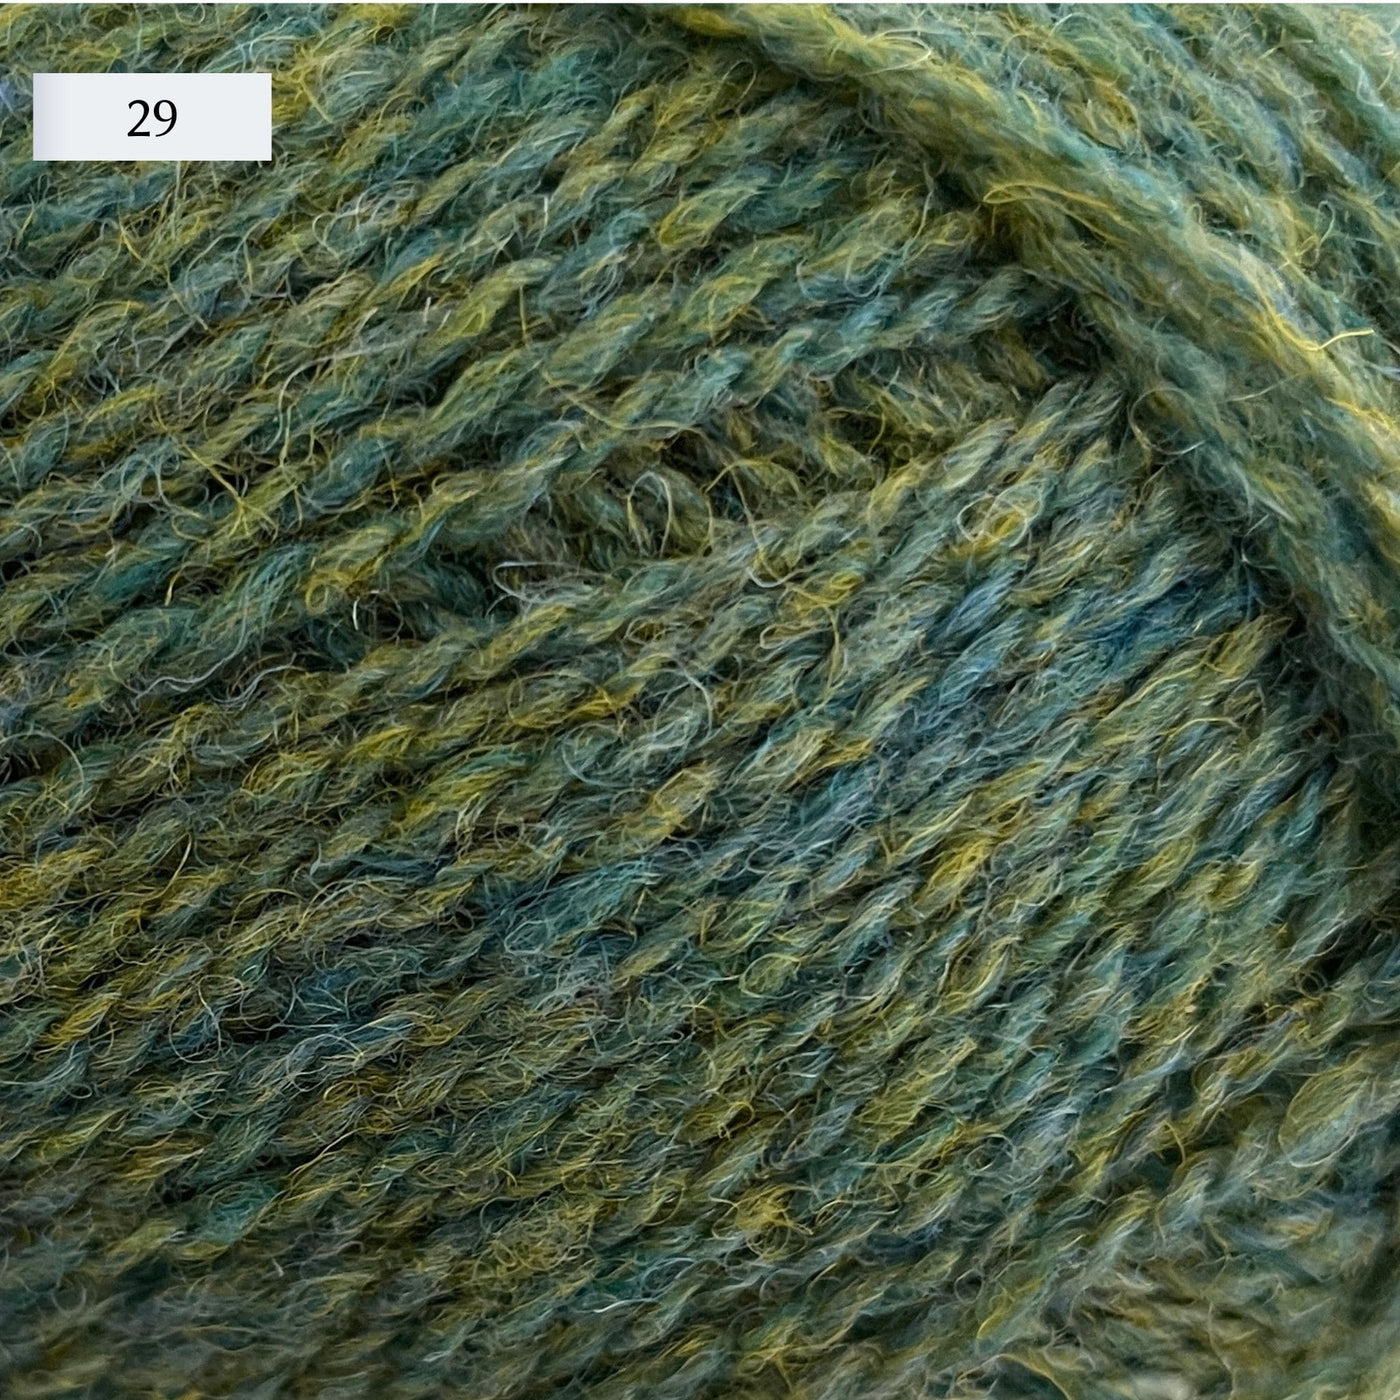 Jamieson & Smith 2ply Jumper Weight, light fingering weight yarn, in color 29, a heathered teal with yellow